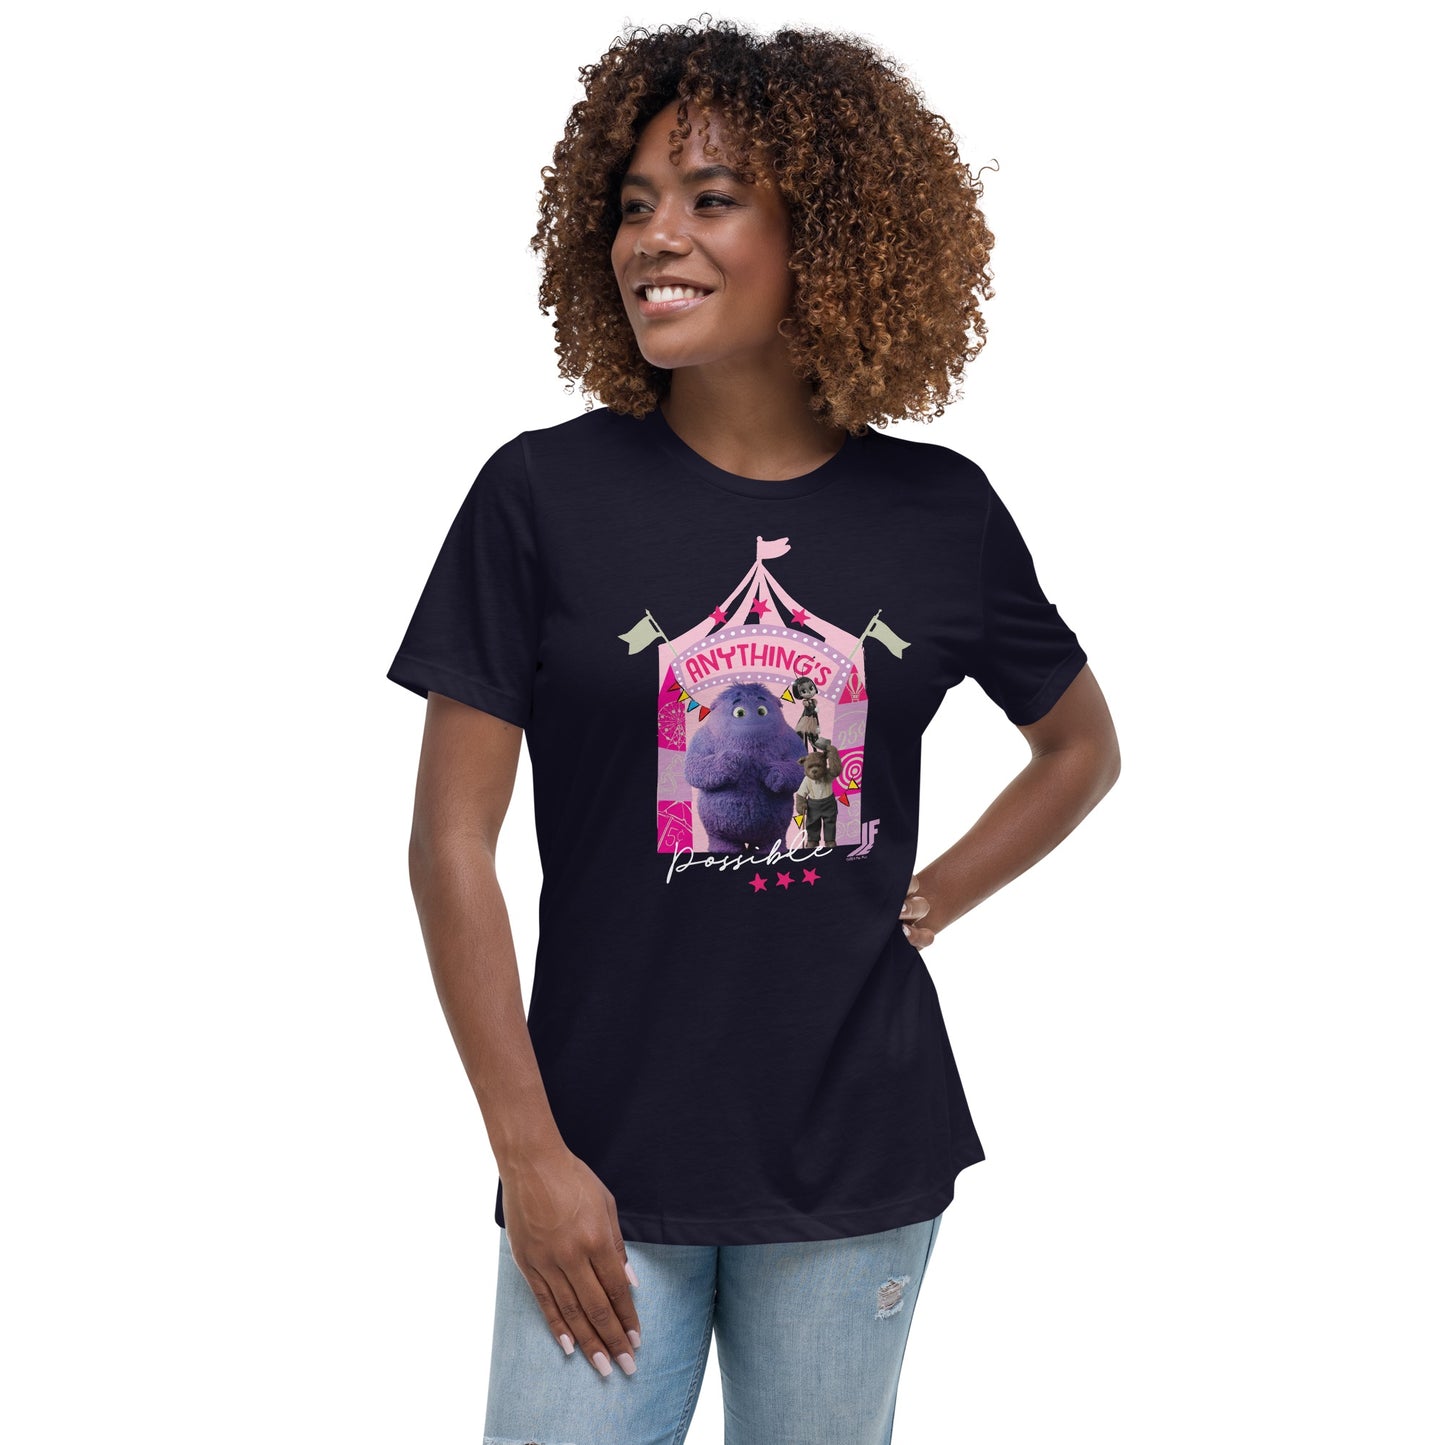 IF Anything Is Possible Women's T-shirt